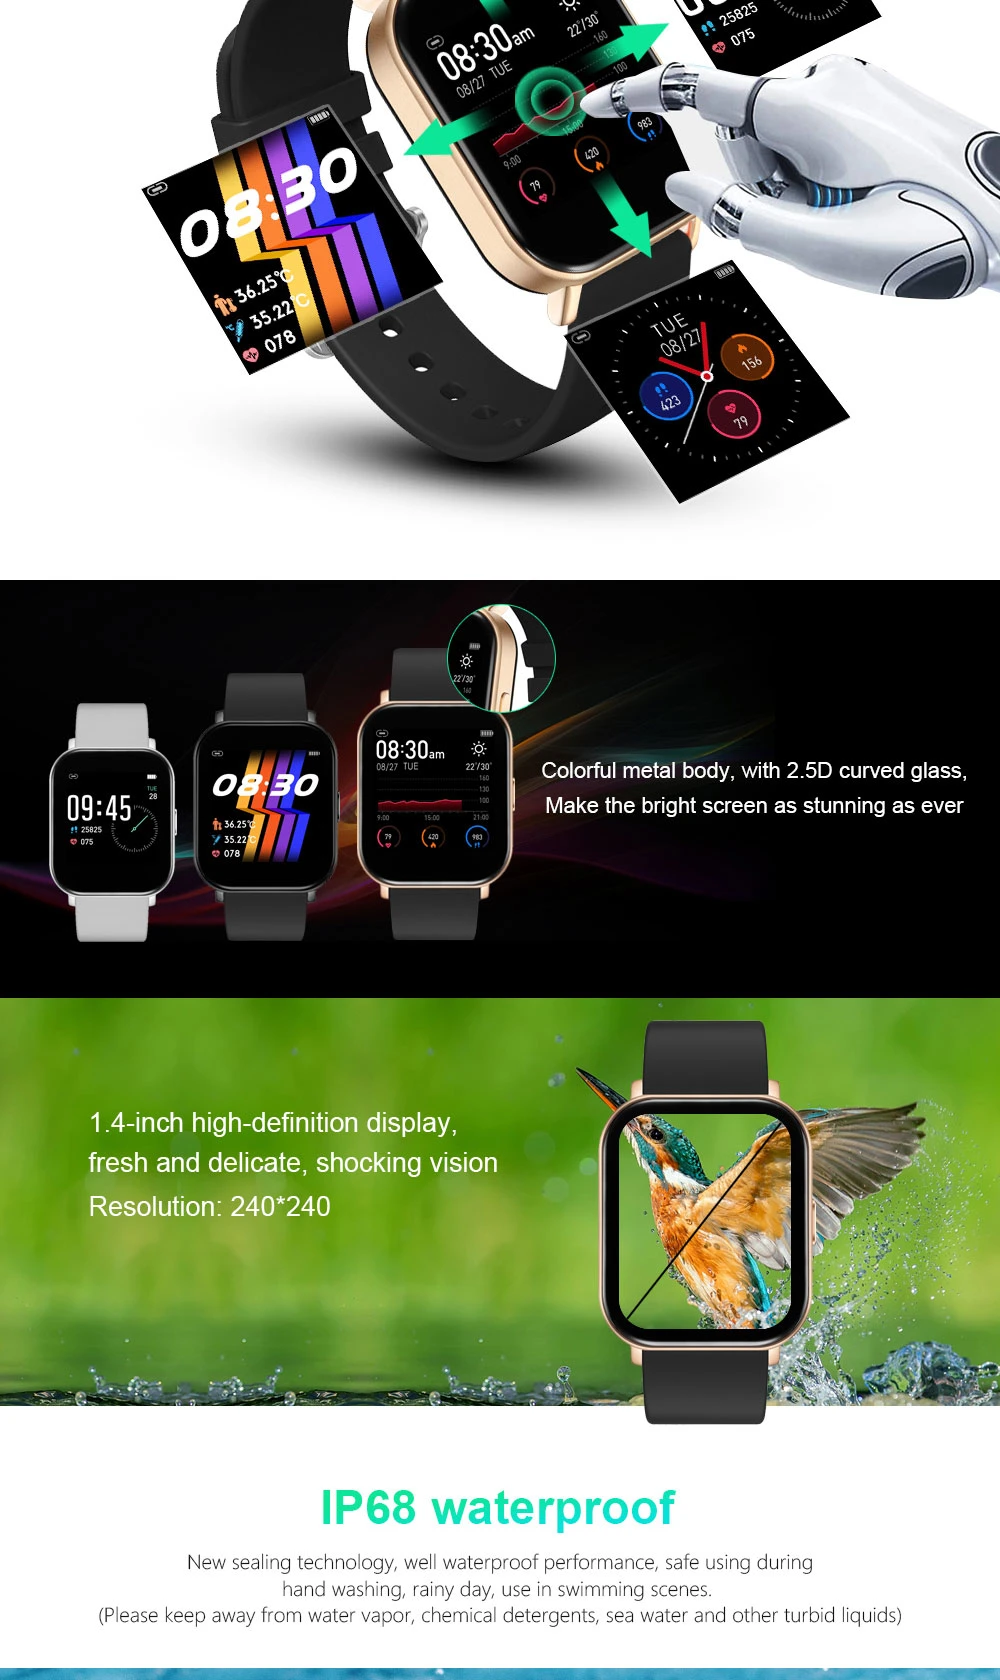 Body Temperature Smart Watch with Blood Pressure and Heart Rate